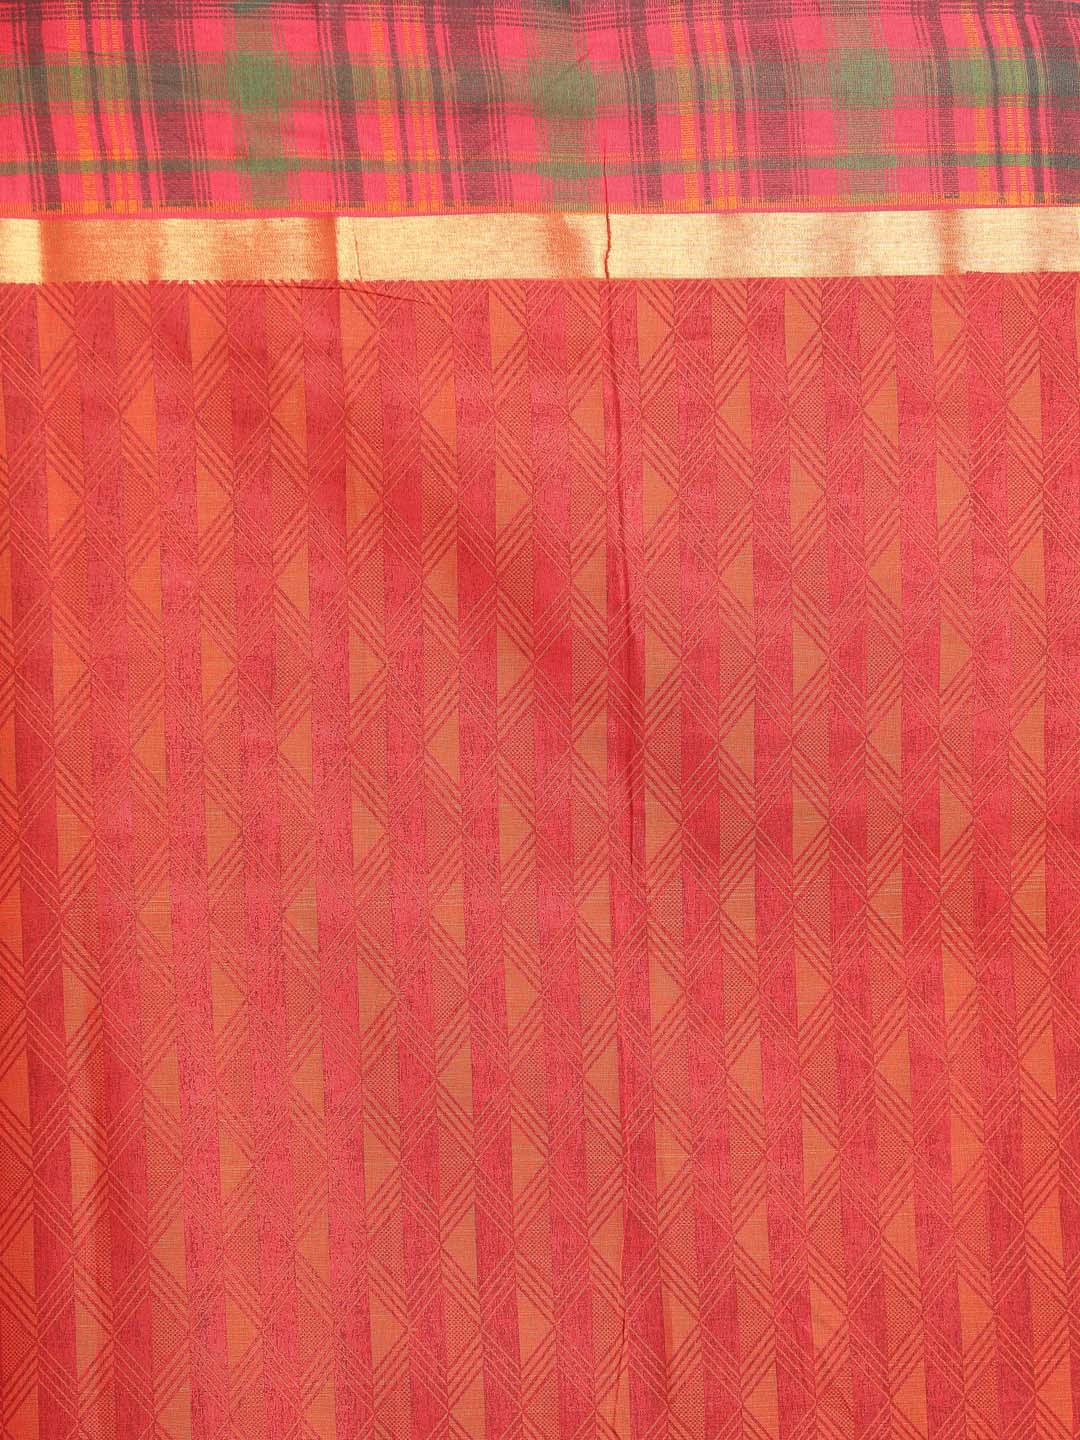 Indethnic Printed Cotton Blend Saree in Rust - Saree Detail View